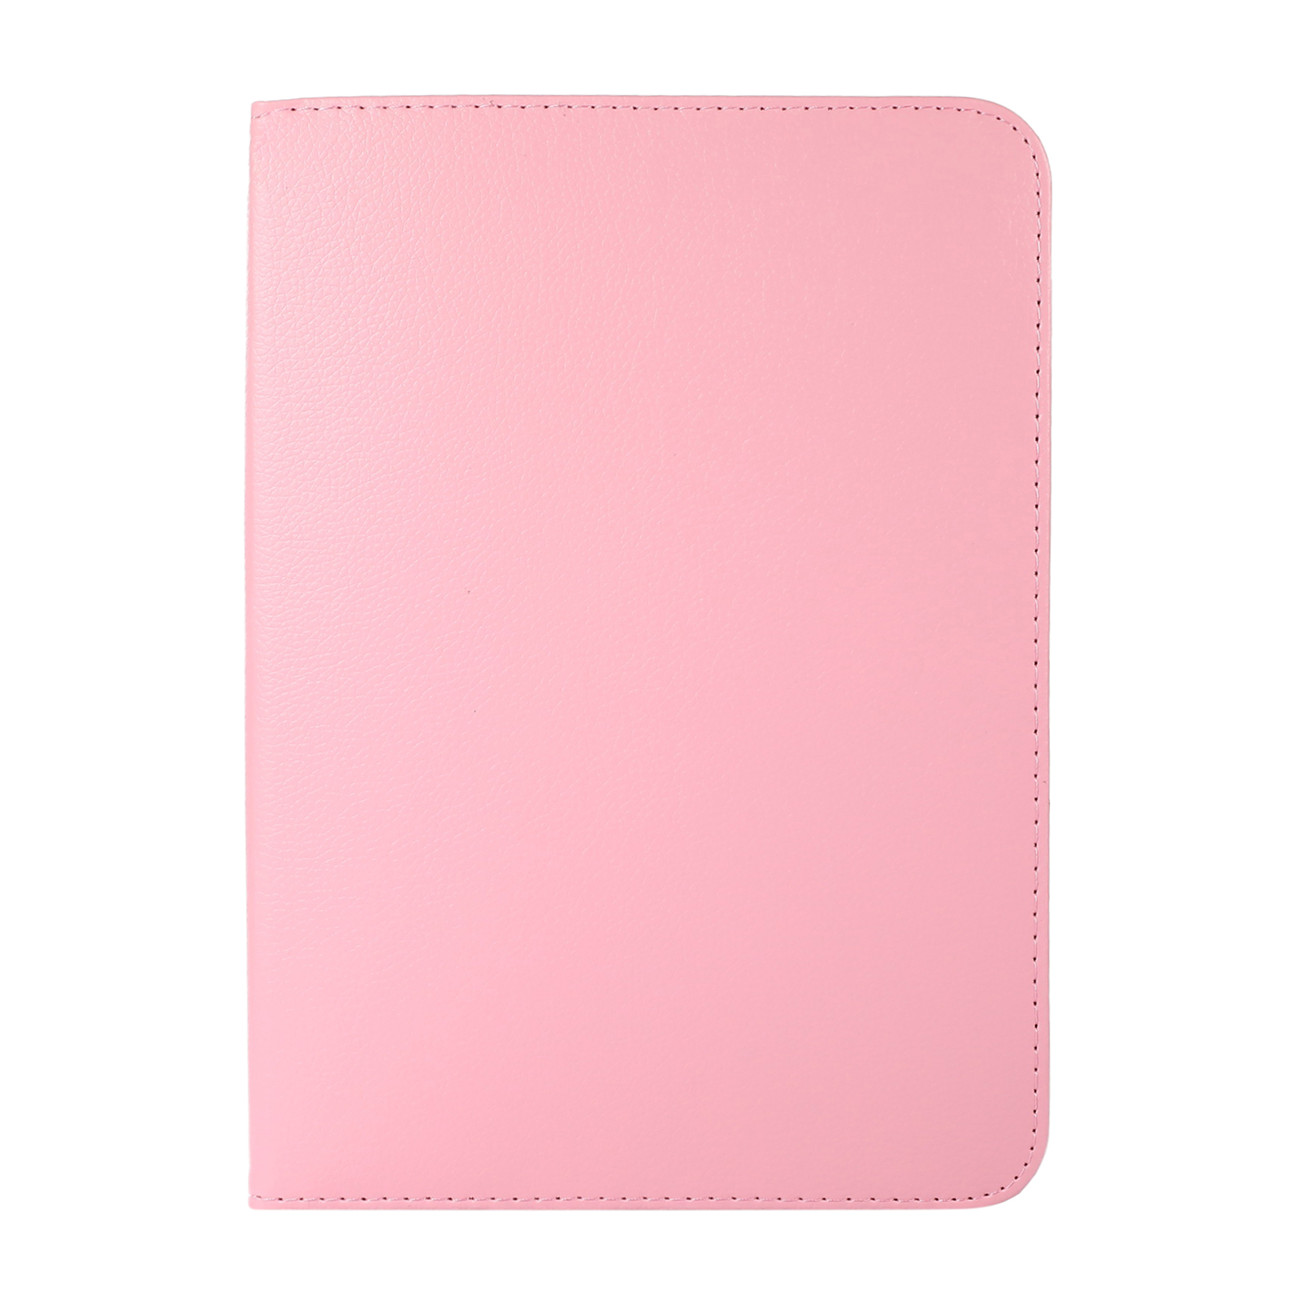 Pu Leather Rotating Case Smart Cover For Ipad Mini 1 2 3 4 5 6 Gen 9th ...